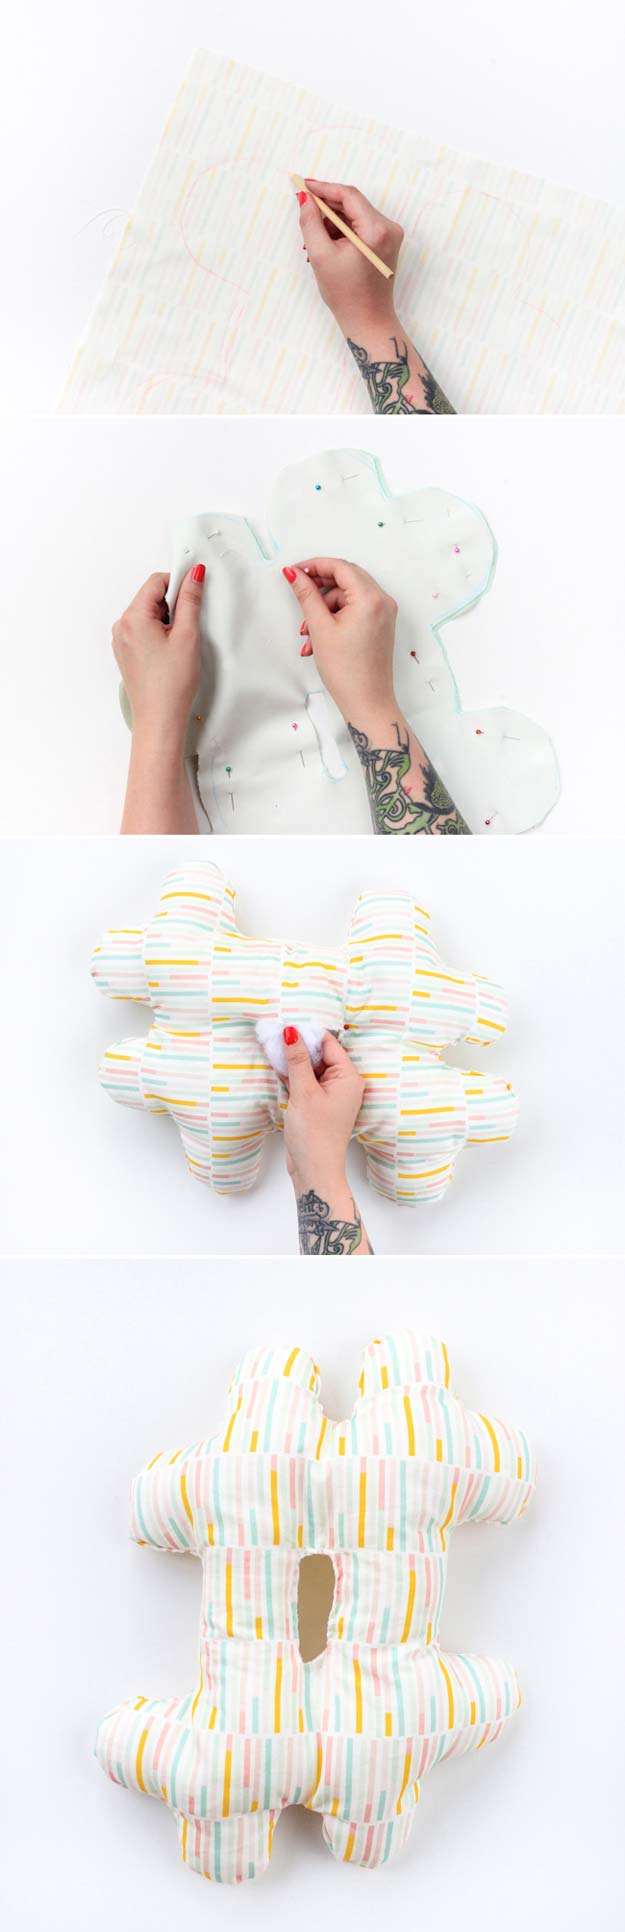 Best DIY Ideas from Tumblr - DIY Hashtag Pillow - Crafts and DIY Projects Inspired by Tumblr are Perfect Room Decor for Teens and Adults - Fun Crafts and Easy DIY Gifts, Clothes and Bedroom Project Tutorials for Teenagers and Tweens 